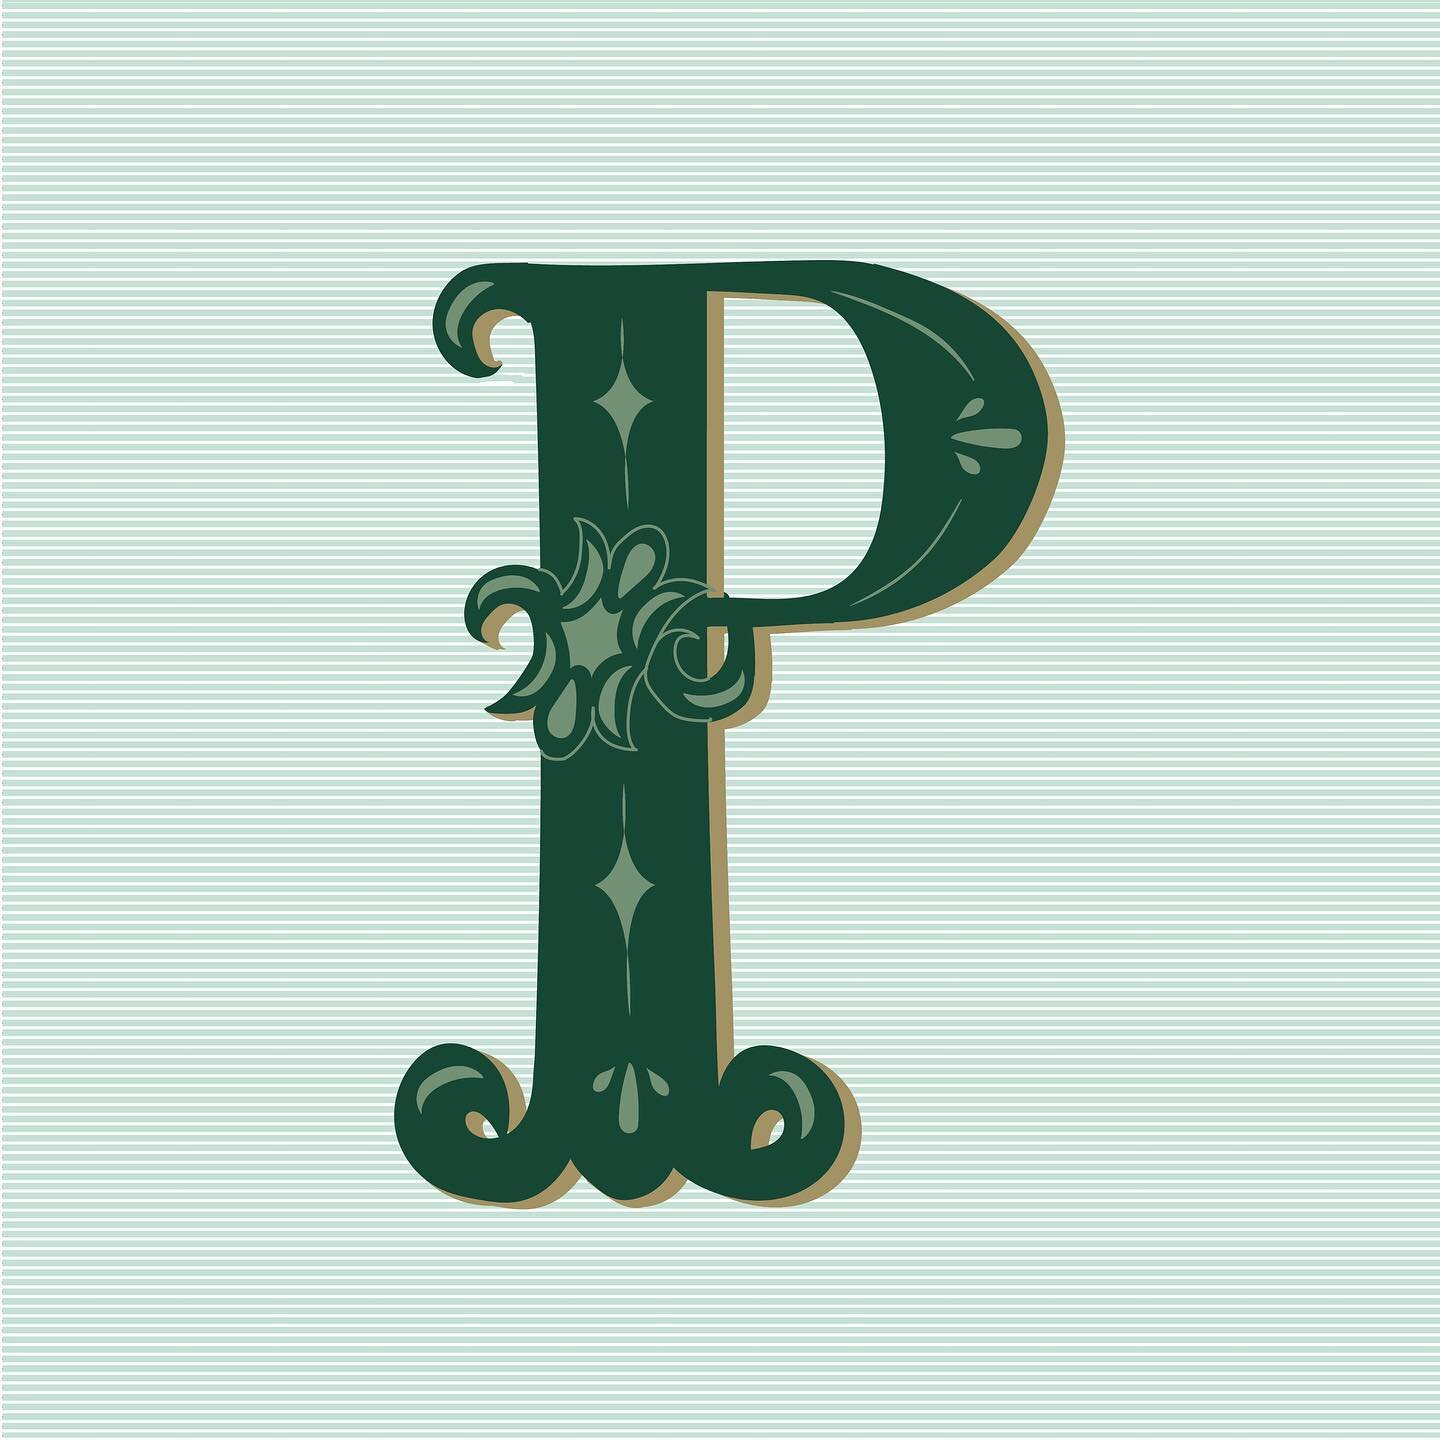 Letter P.
#36daysoftype #36days_P